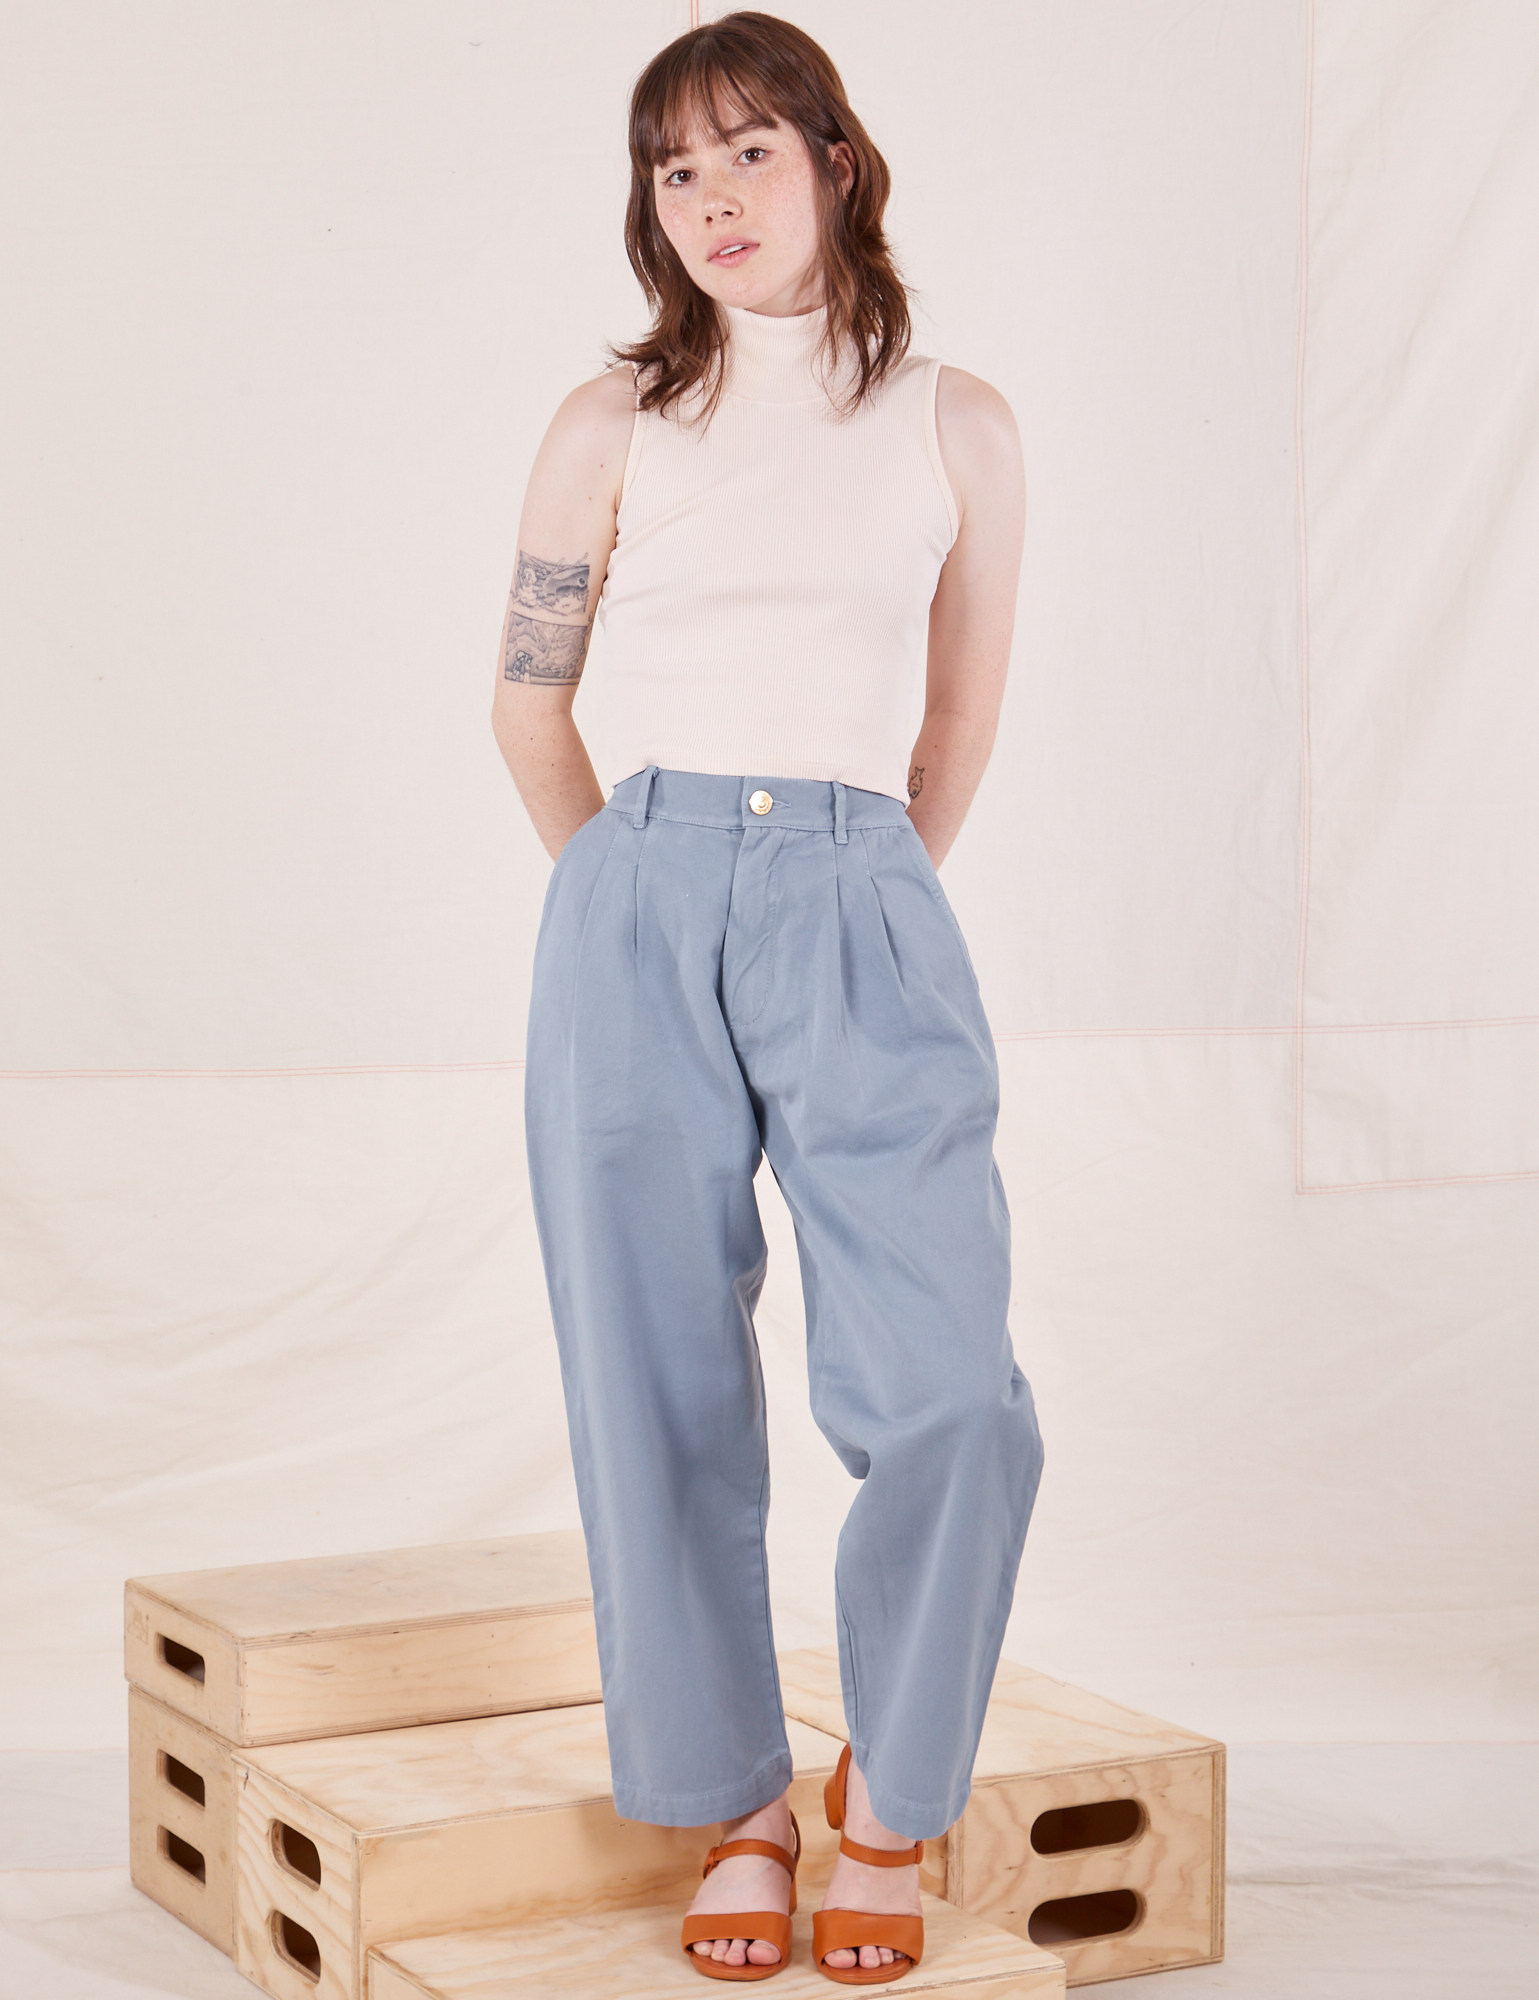 Hana is 5&#39;3&quot; and wearing XXS Petite Organic Trousers in Periwinkle paired with Sleeveless Turtleneck in vintage tee off-white